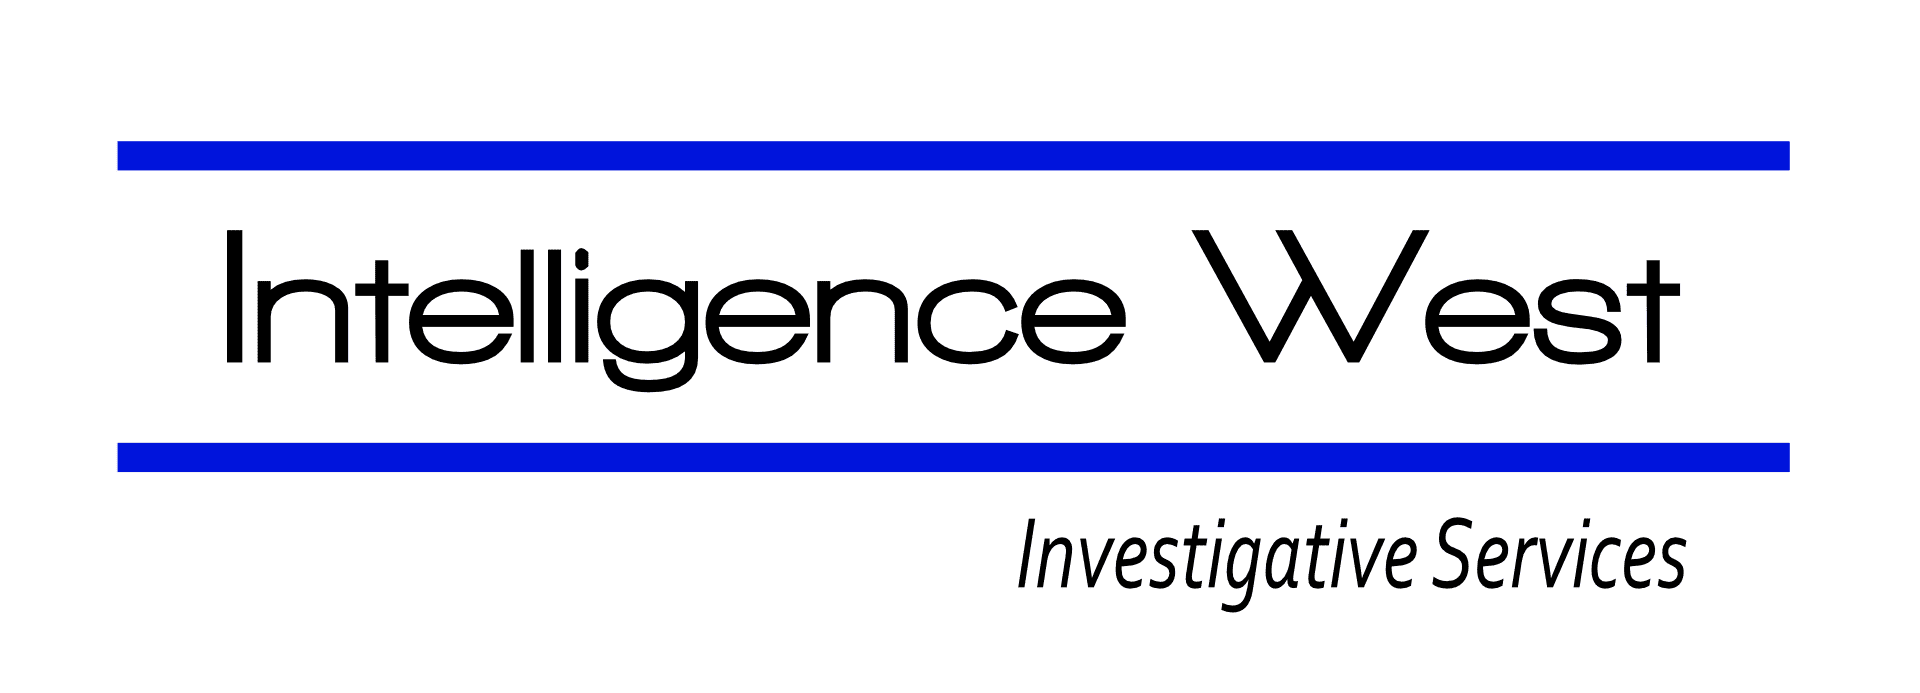 Asset Search Experts - Intelligence West